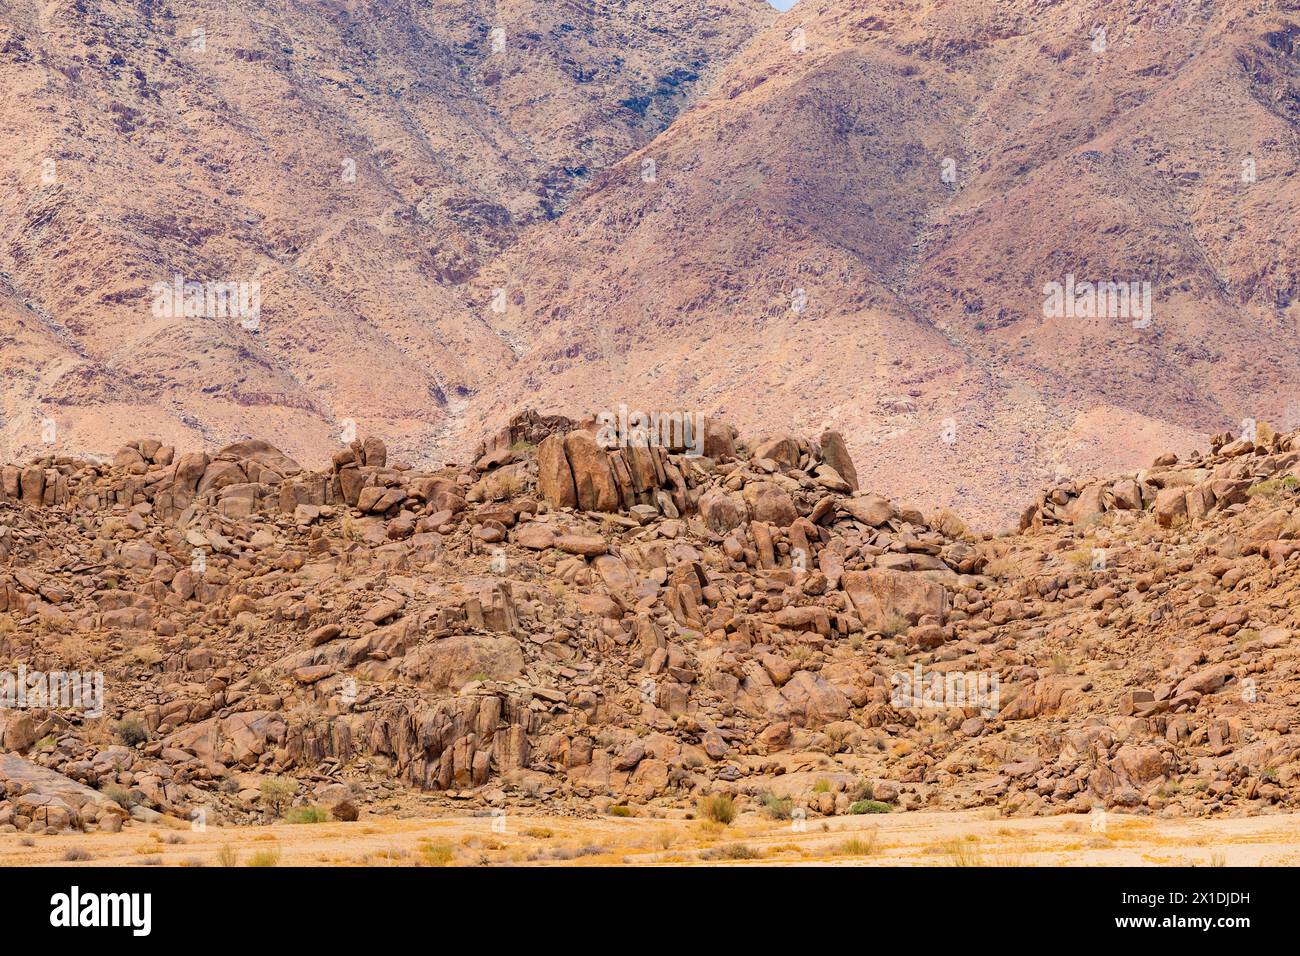 Unusual rock formations in the Richtersveld National Park, arid area of South Africa Stock Photo